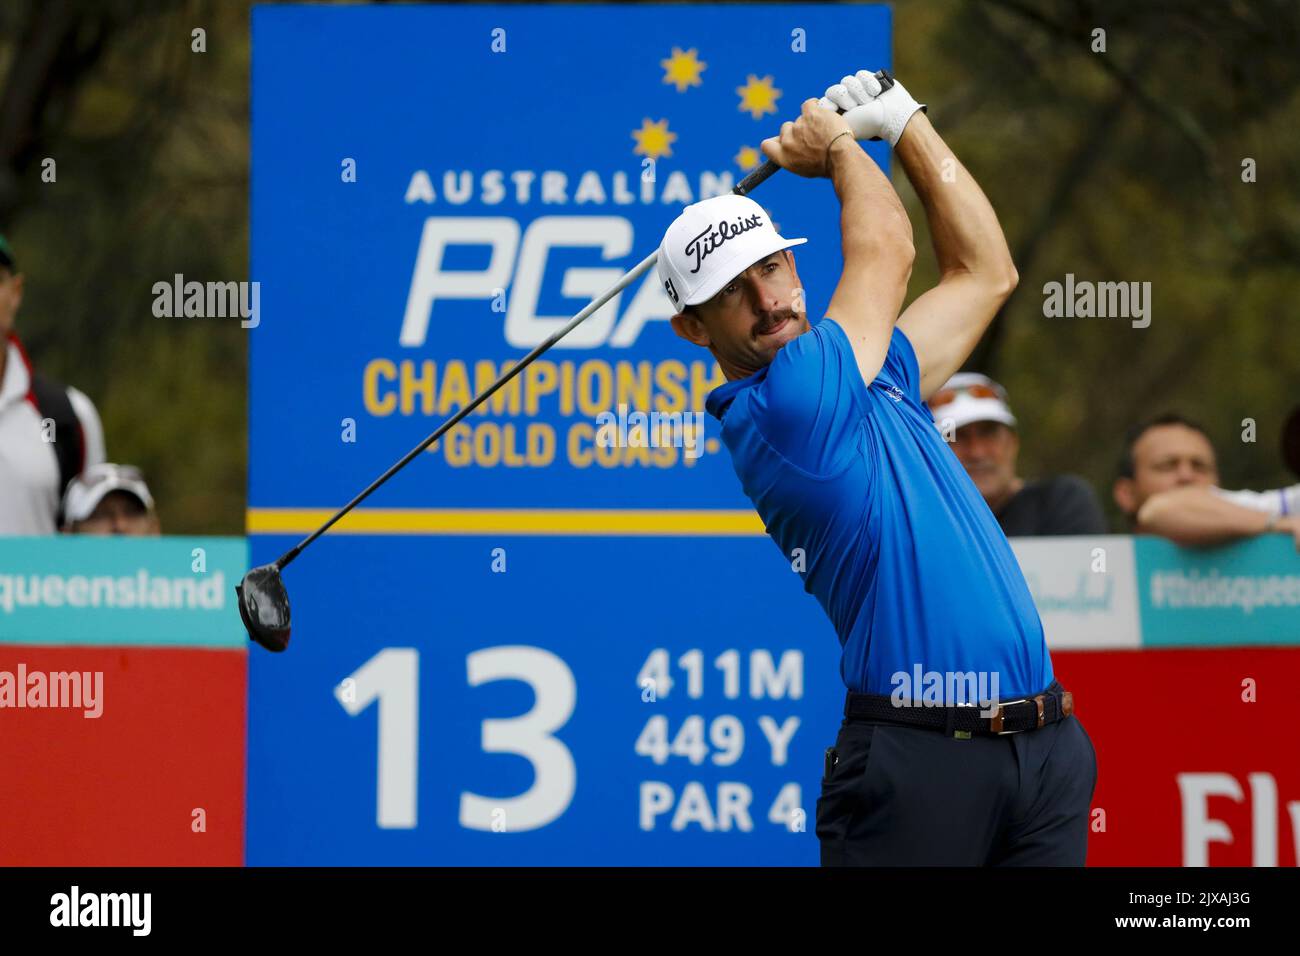 Golfer Wade Ormsby in action during the Australian PGA Championships at ...